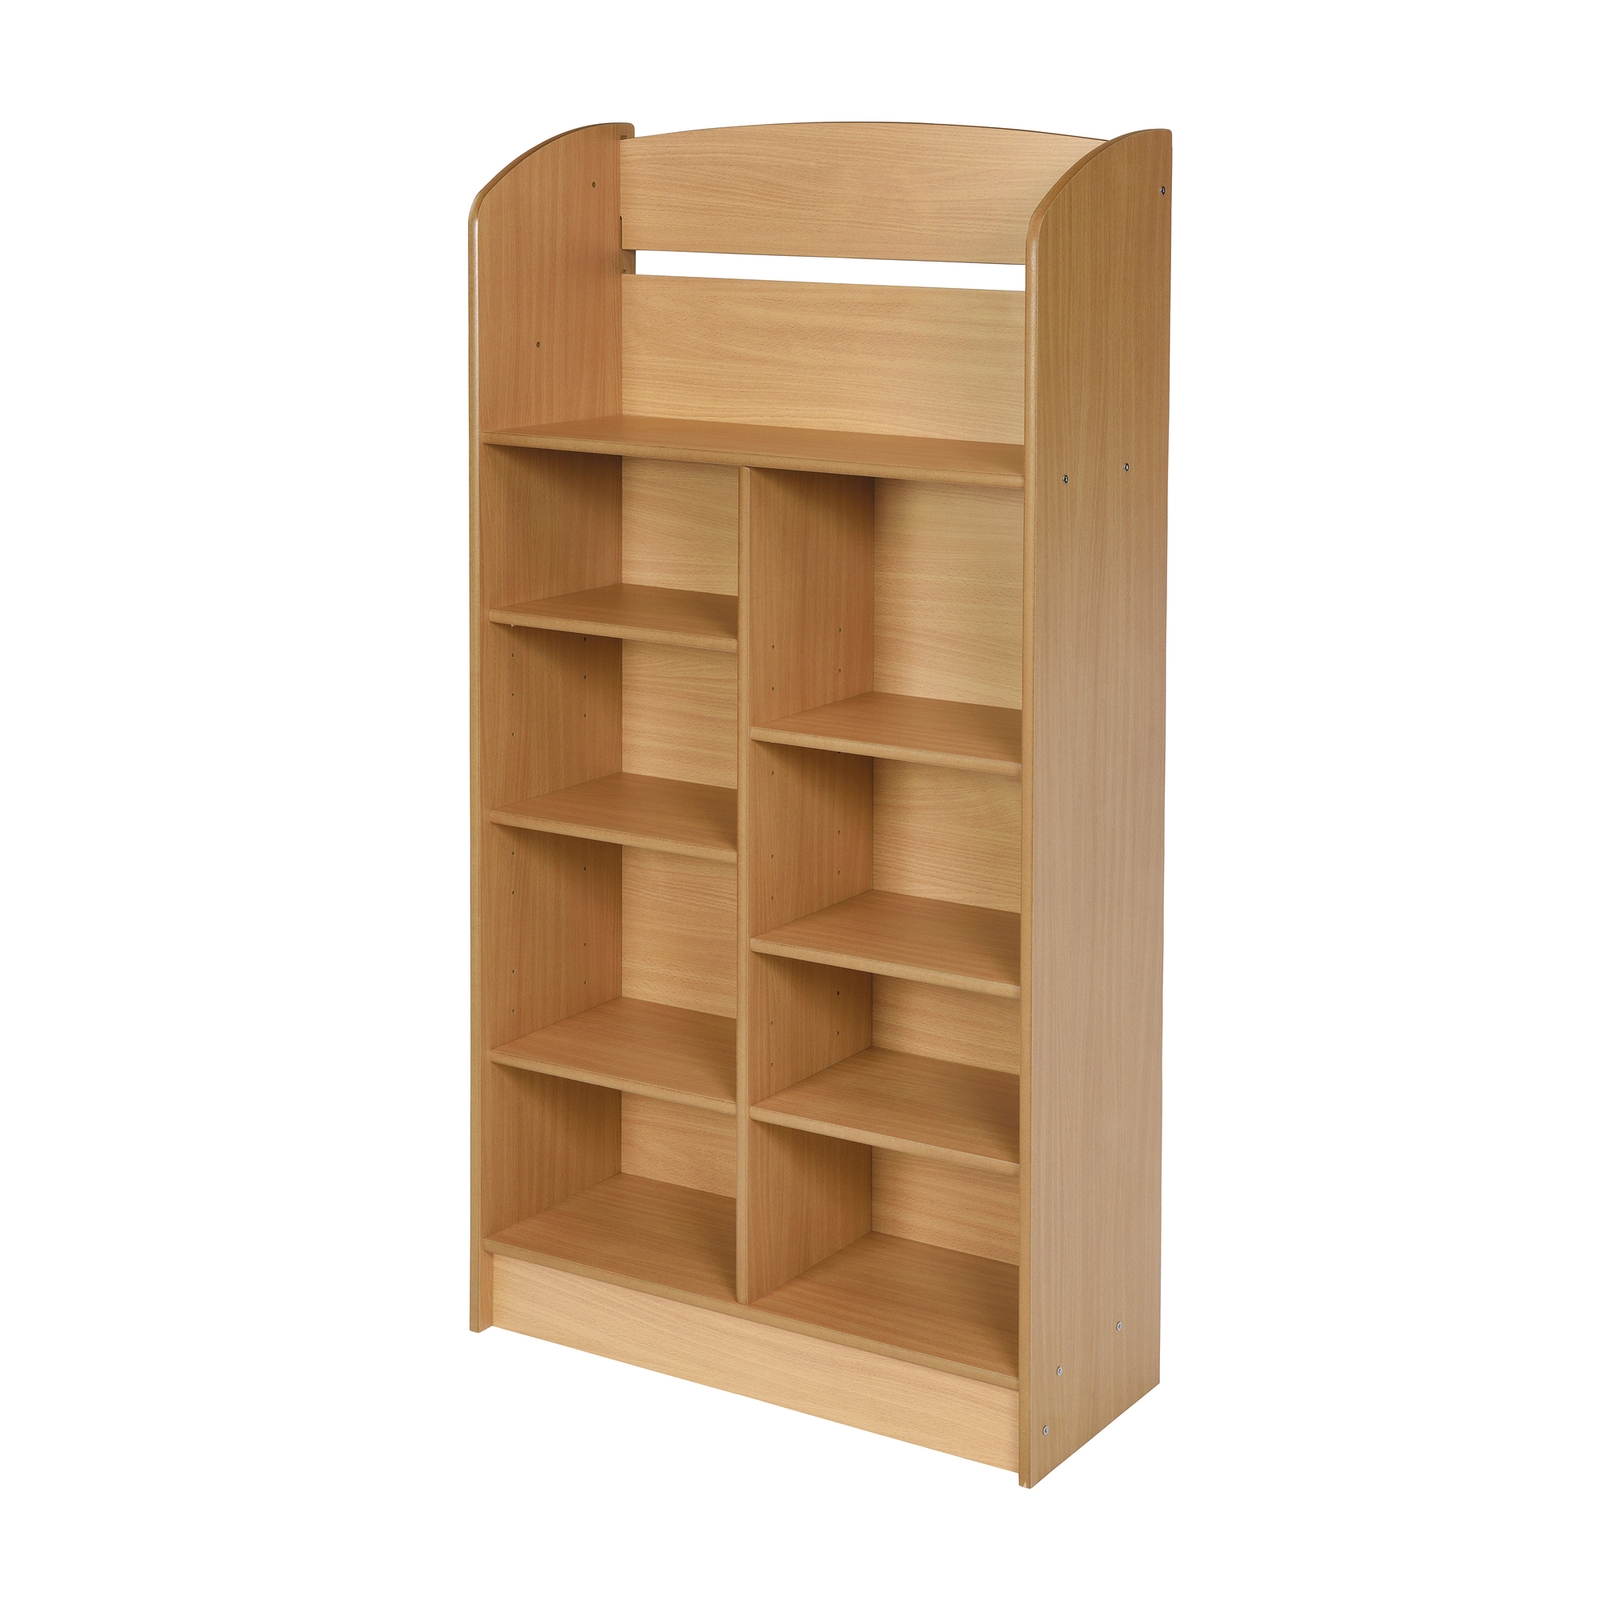 Display Bookcases - Beech